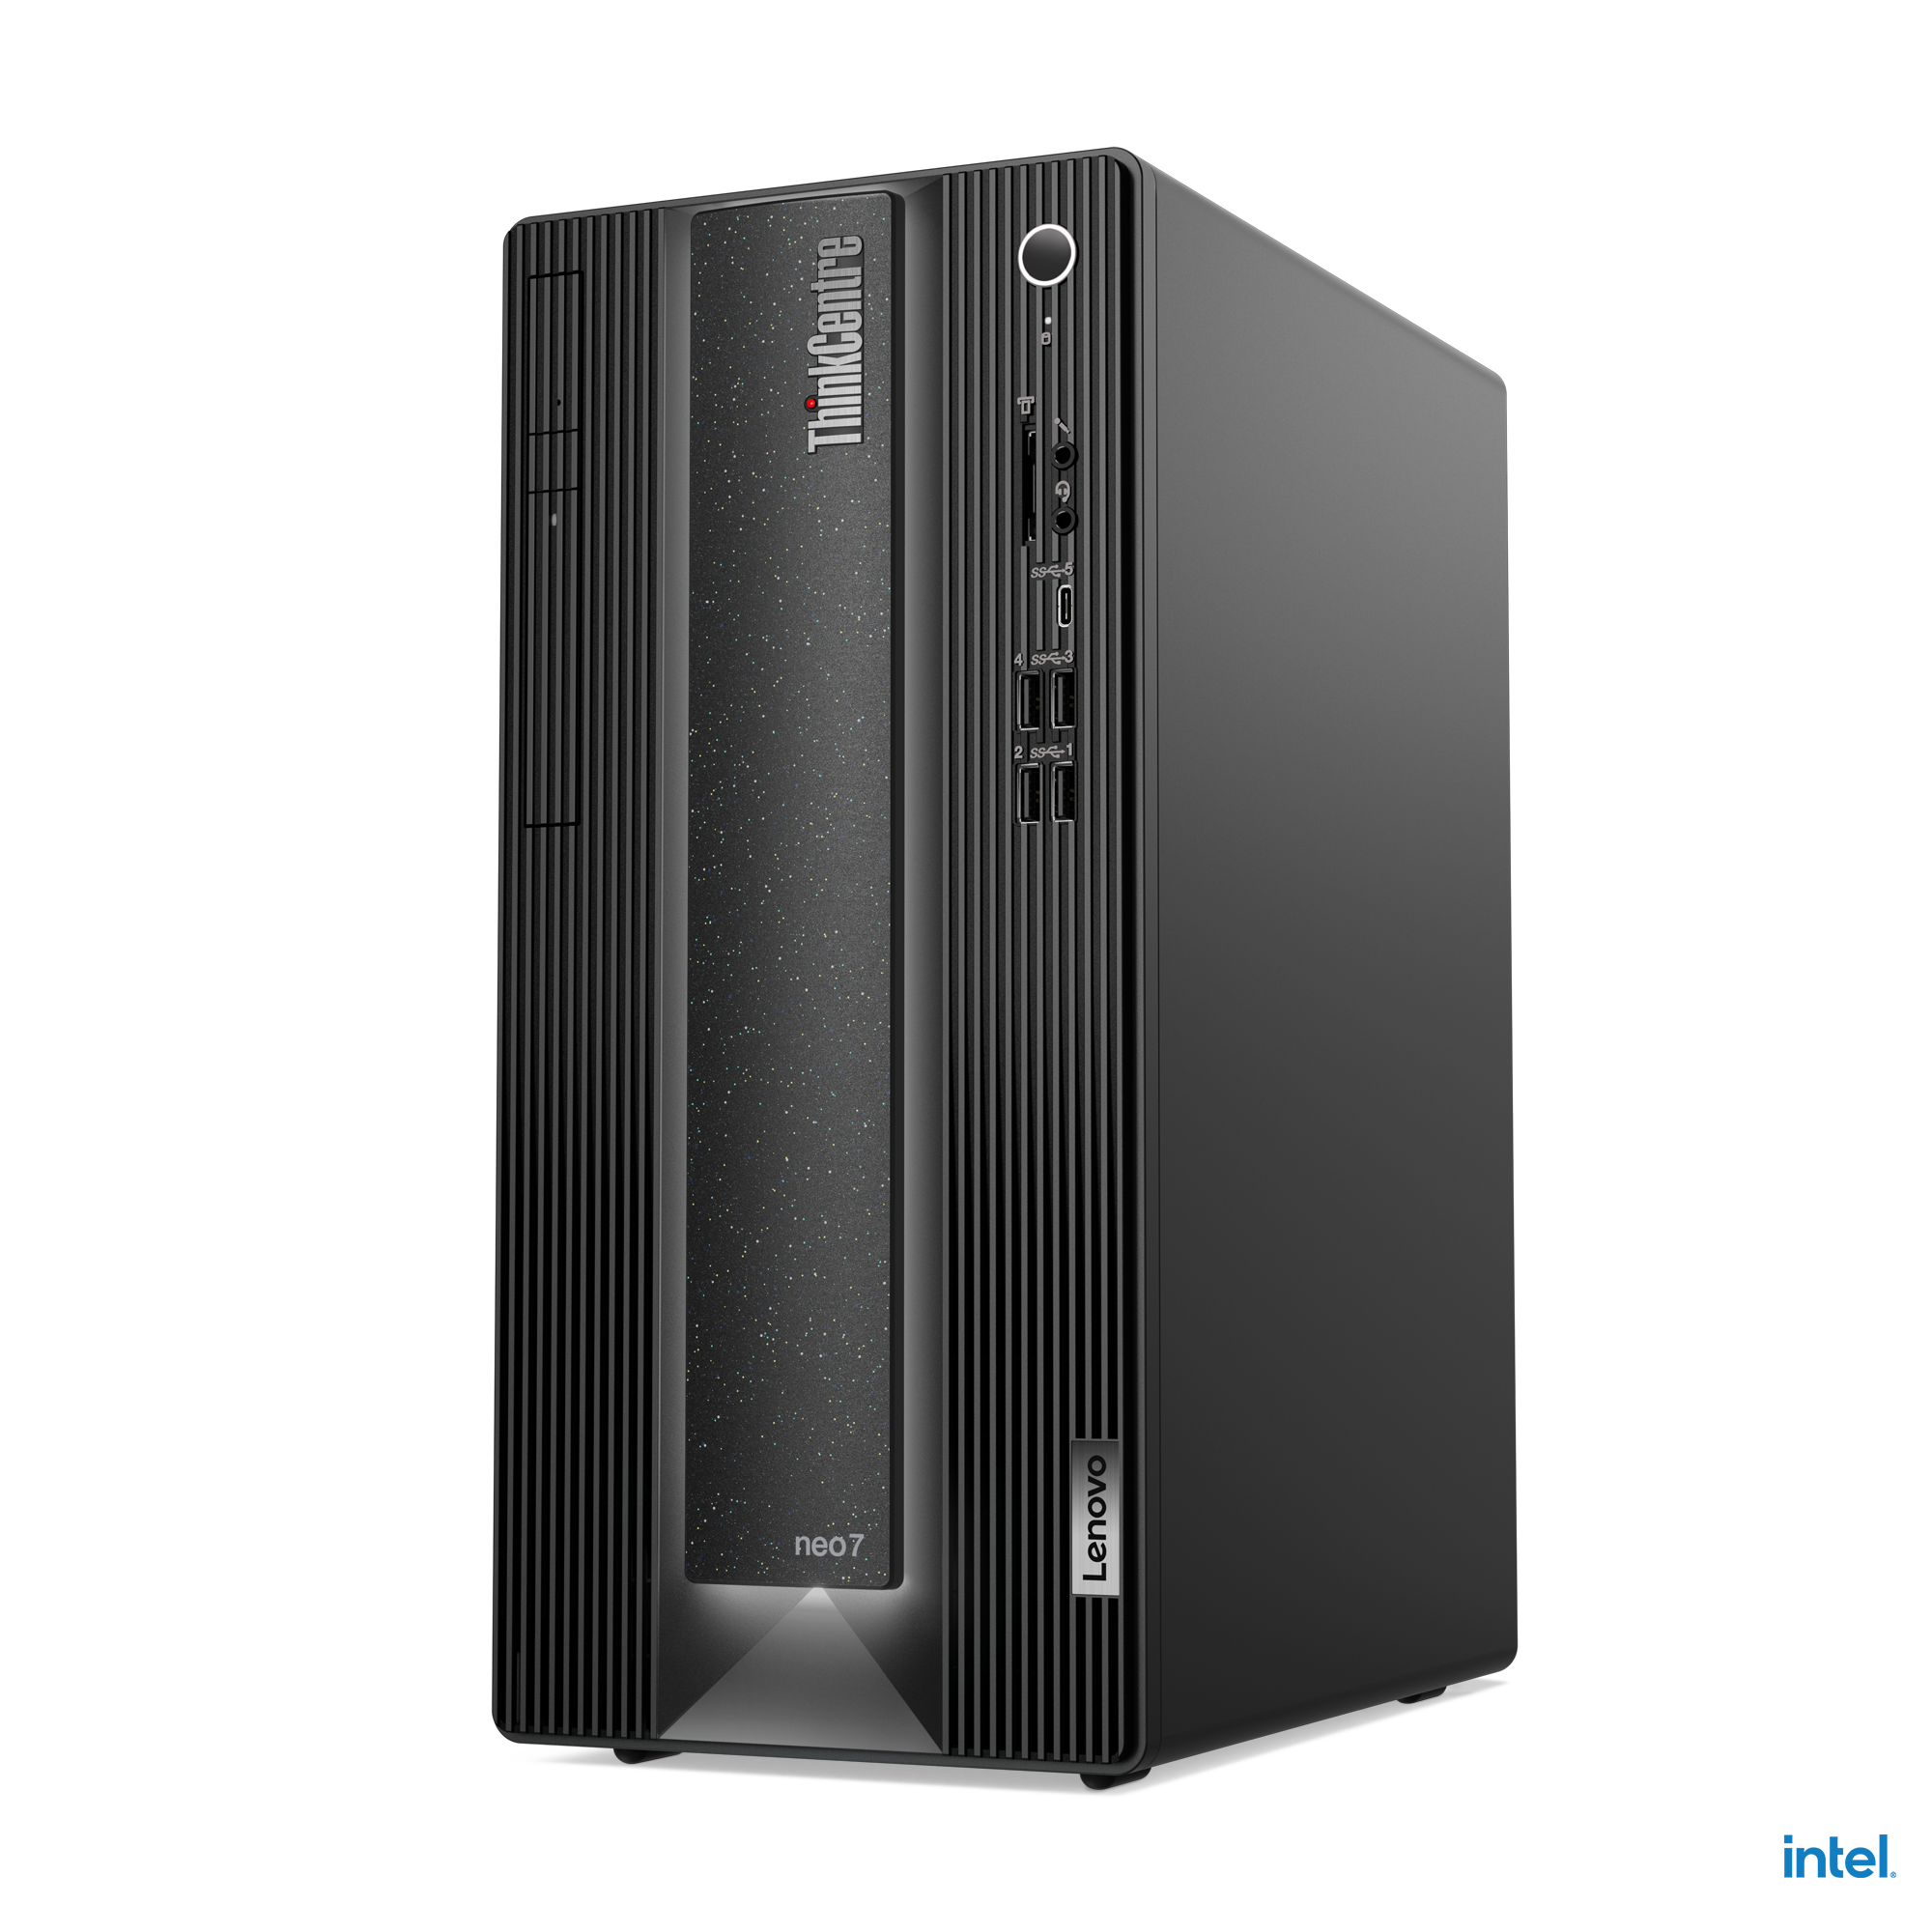 Lenovo brings new ThinkCentre Neo Desktops powered by 12th Gen Intel processors